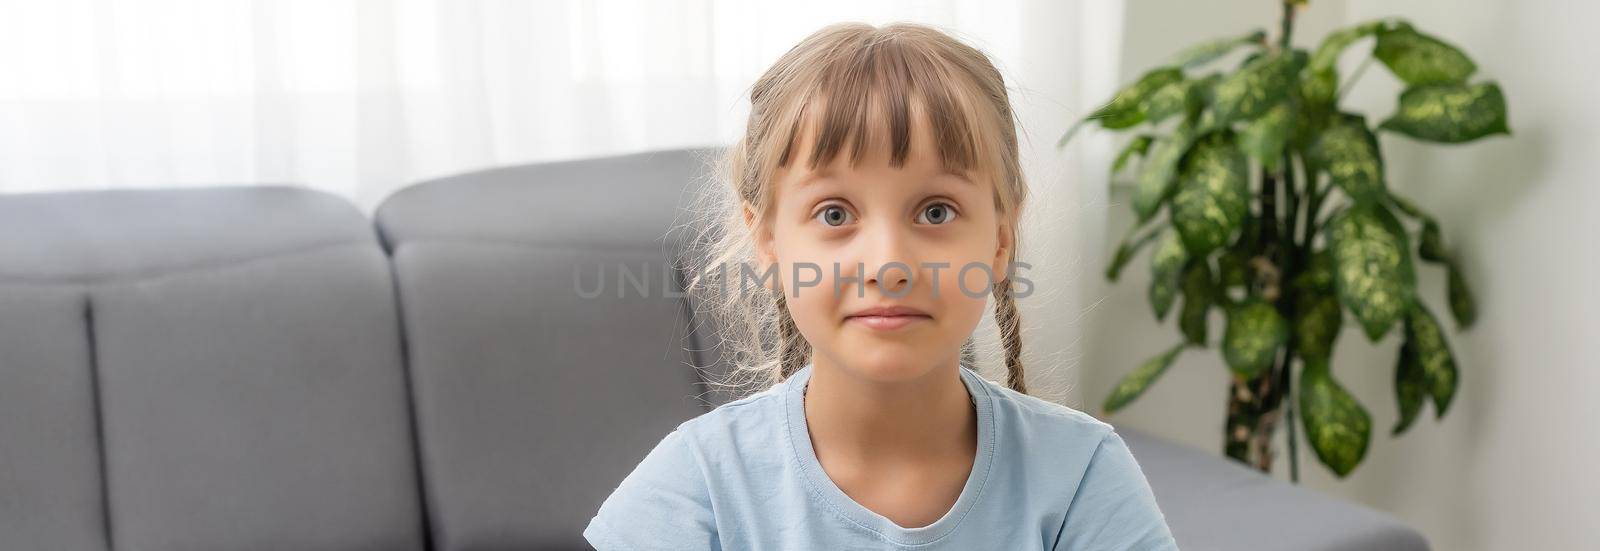 Adorable cute little vlogger looking at webcam, smiling child girl talking to camera making video call vlog communicating online sitting on couch at home, happy preschool kid headshot portrait